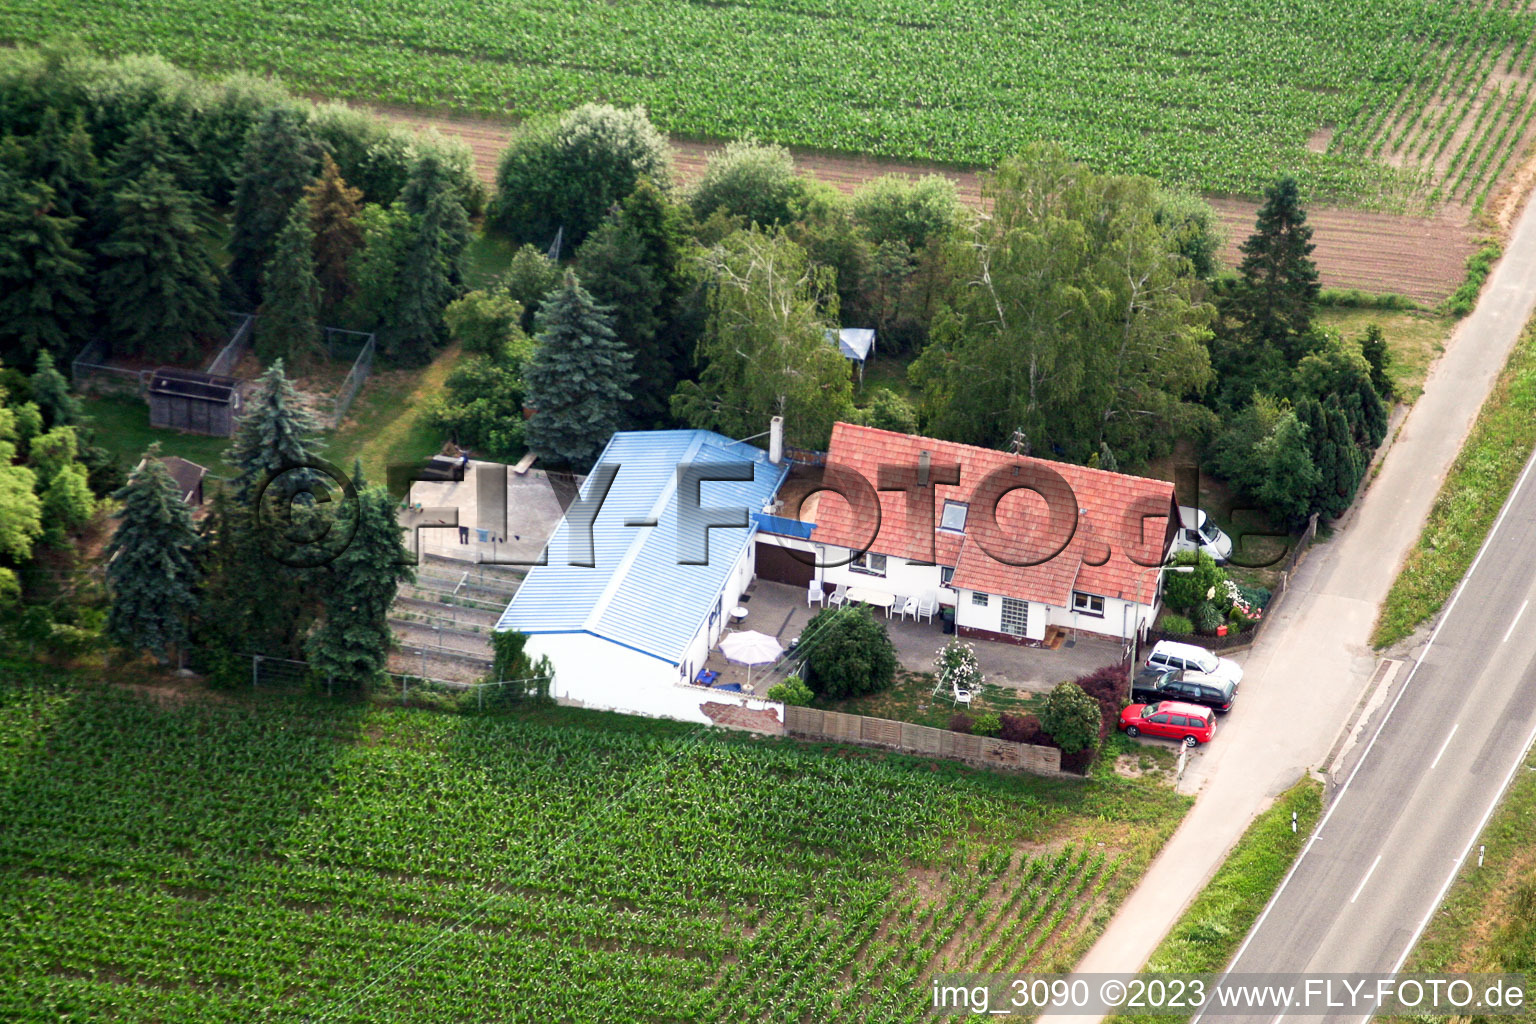 Aerial photograpy of Höfen in the state Rhineland-Palatinate, Germany